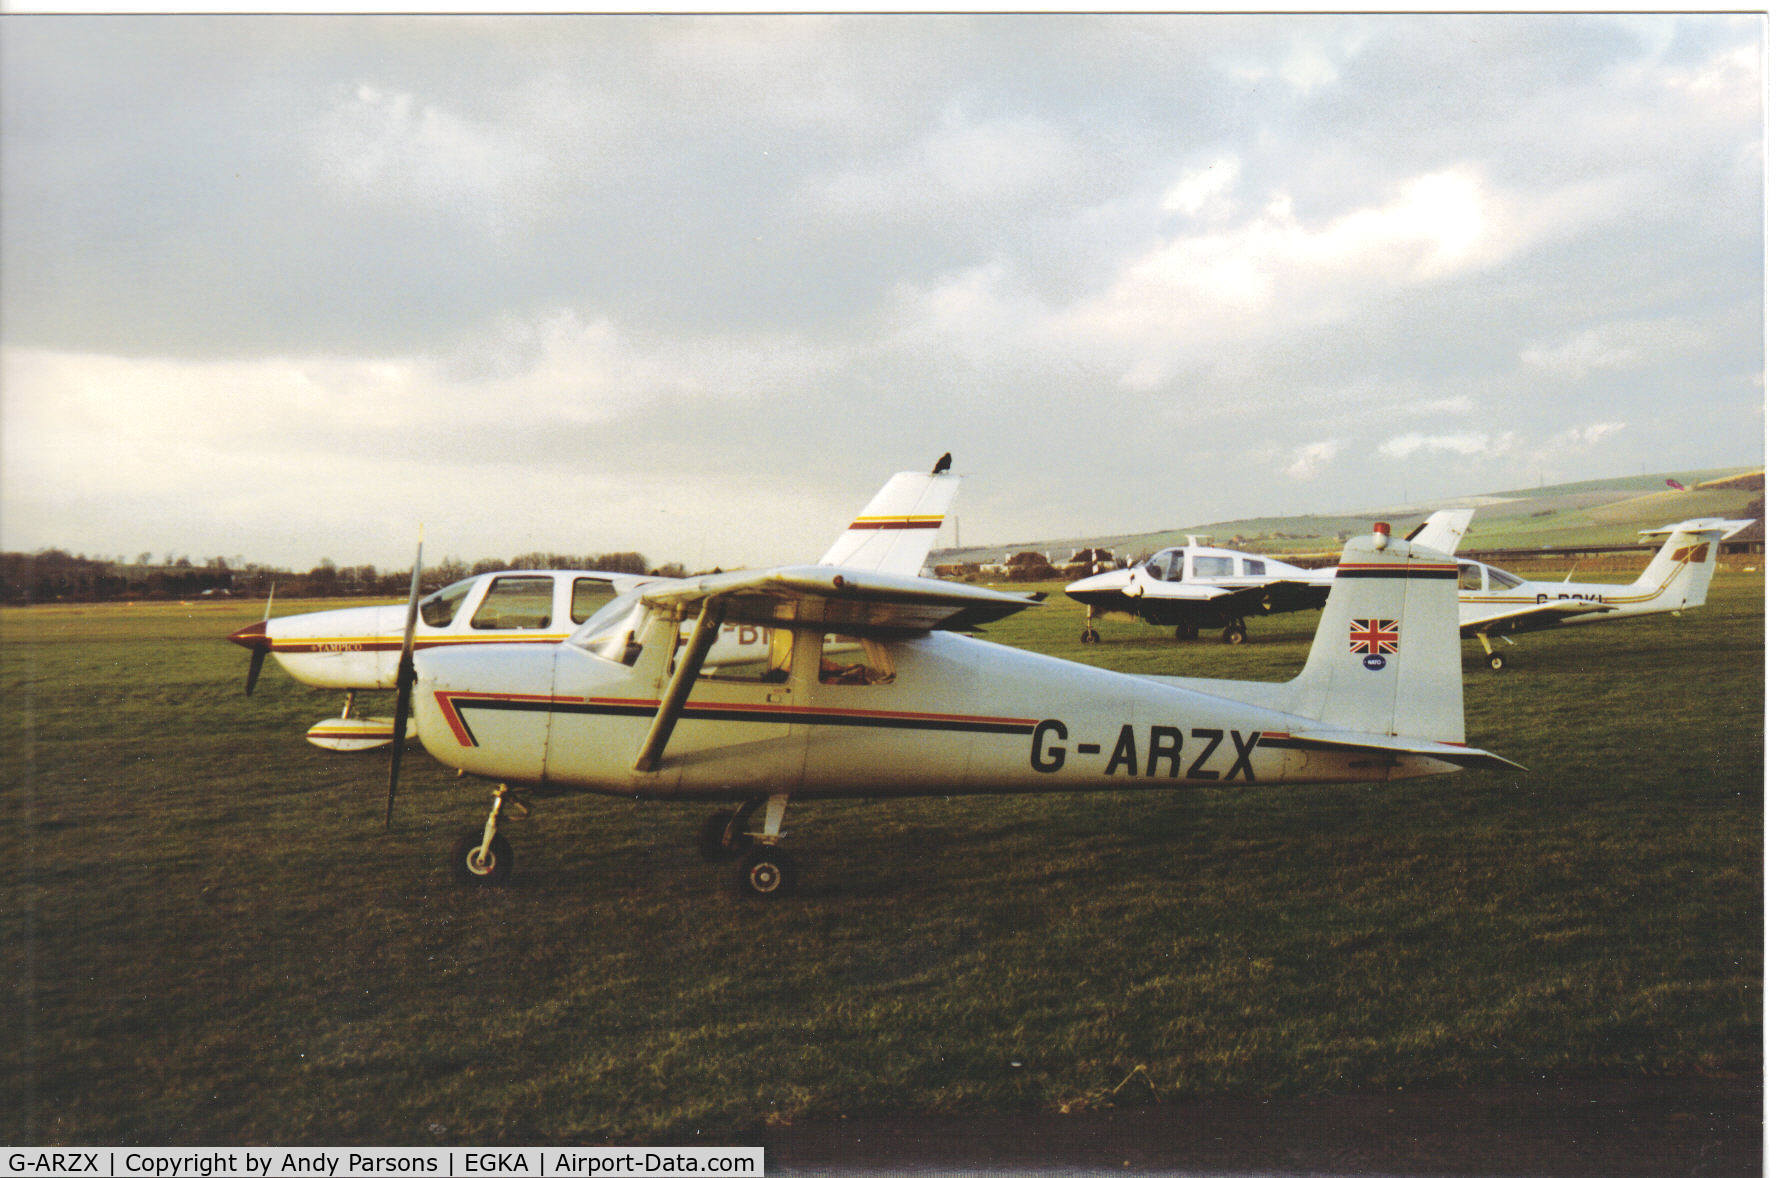 G-ARZX, 1962 Cessna 150B C/N 150-59642, Towards the end of its working life in a more modern col scheme (scanned print)